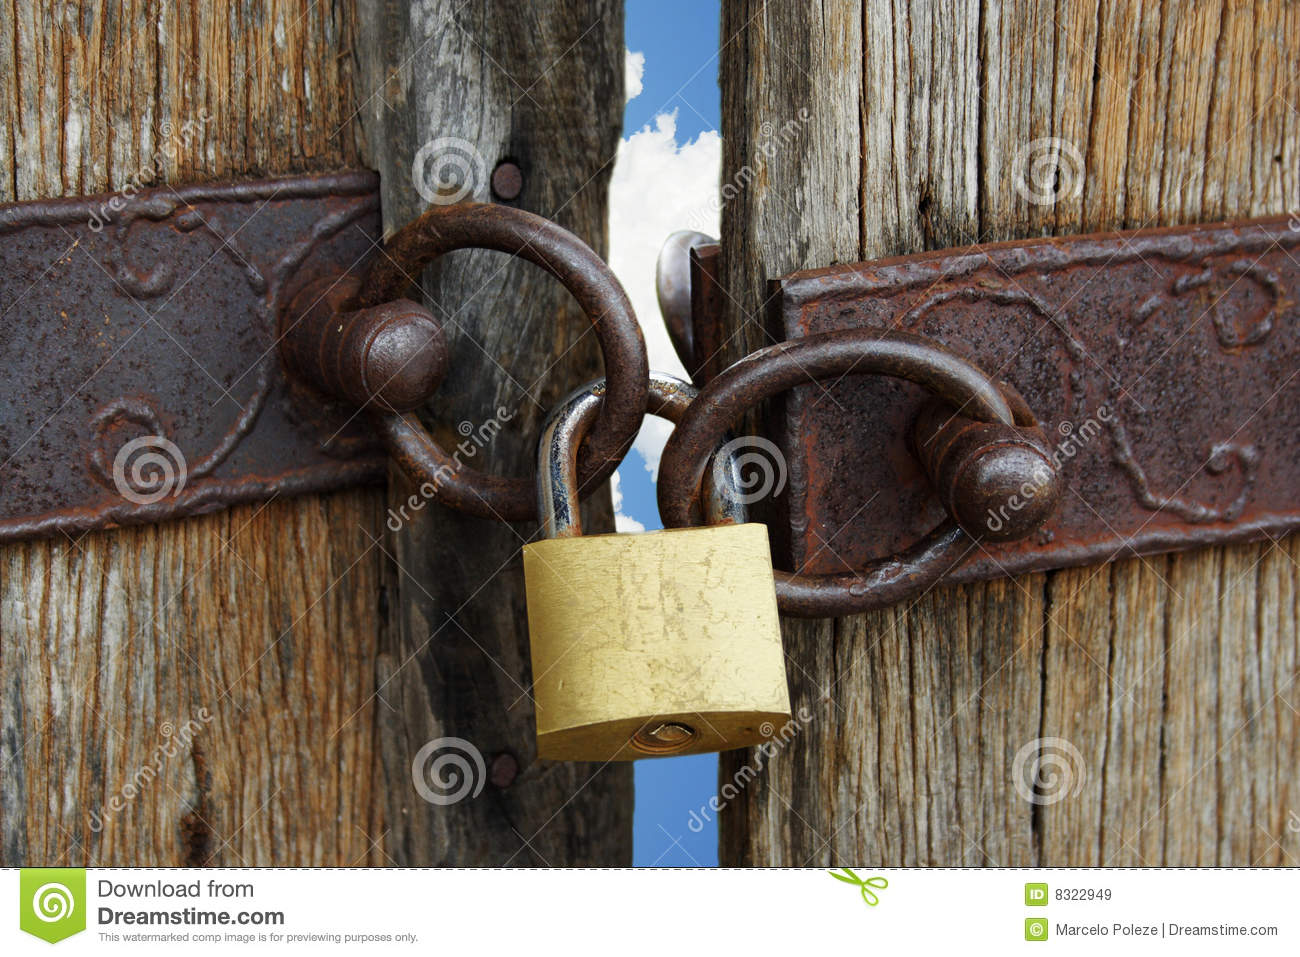 Locked Heaven Gate Royalty Free Stock Images   Image  8322949